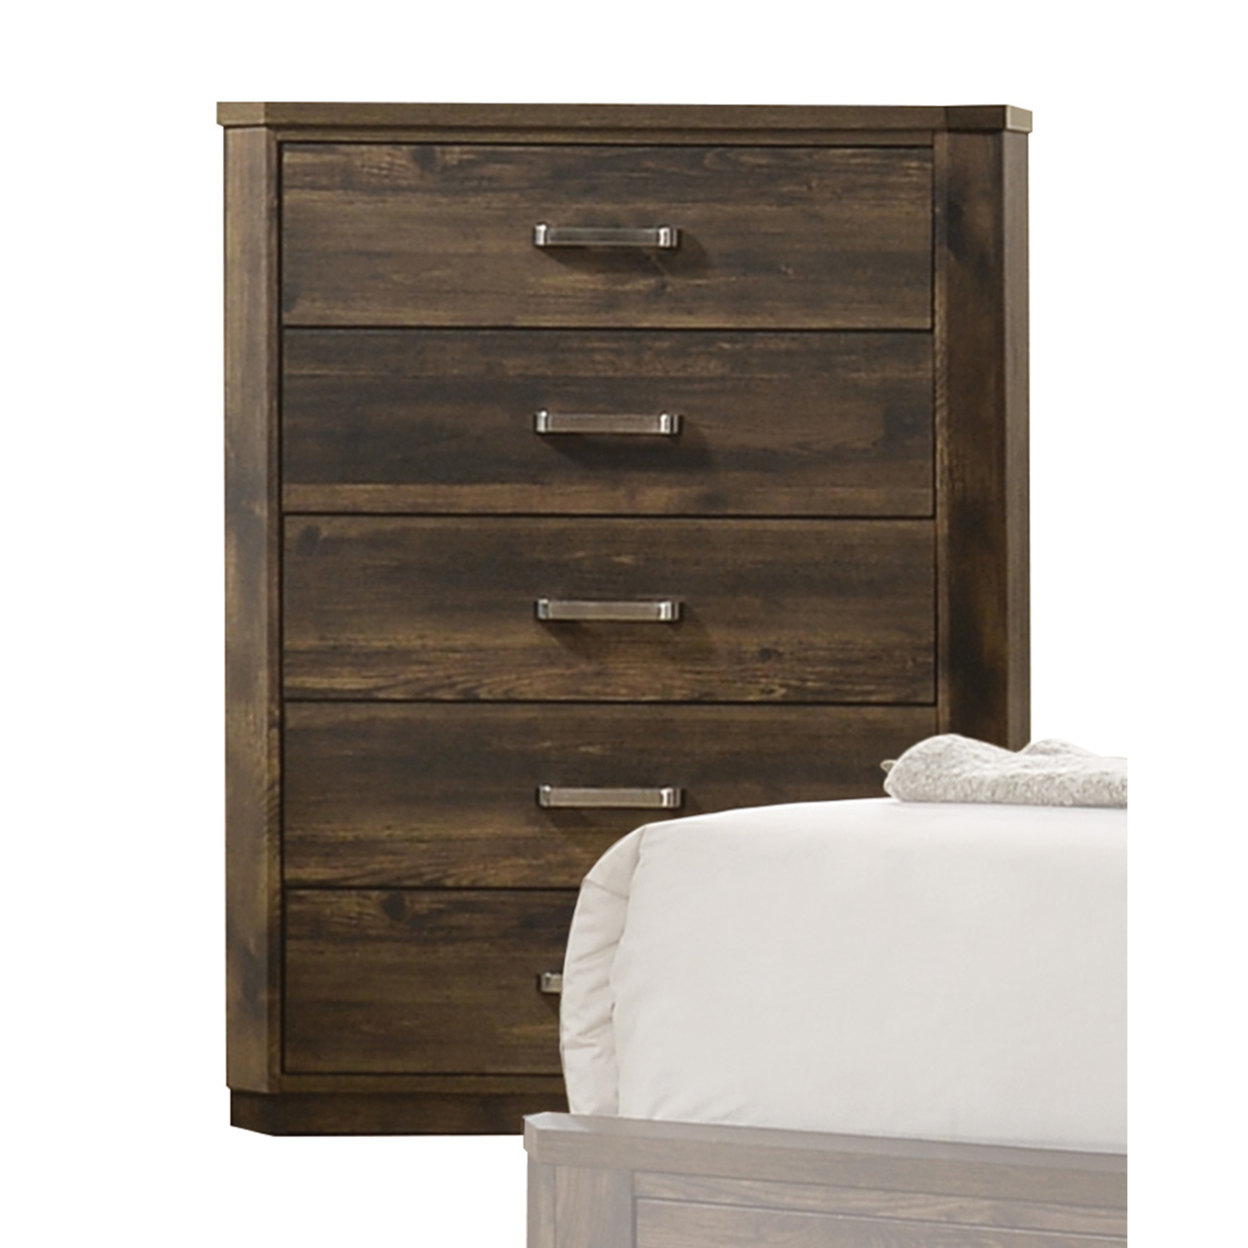 Transitional Style 5 Drawer Wooden Chest With Plinth Base, Brown- Saltoro Sherpi